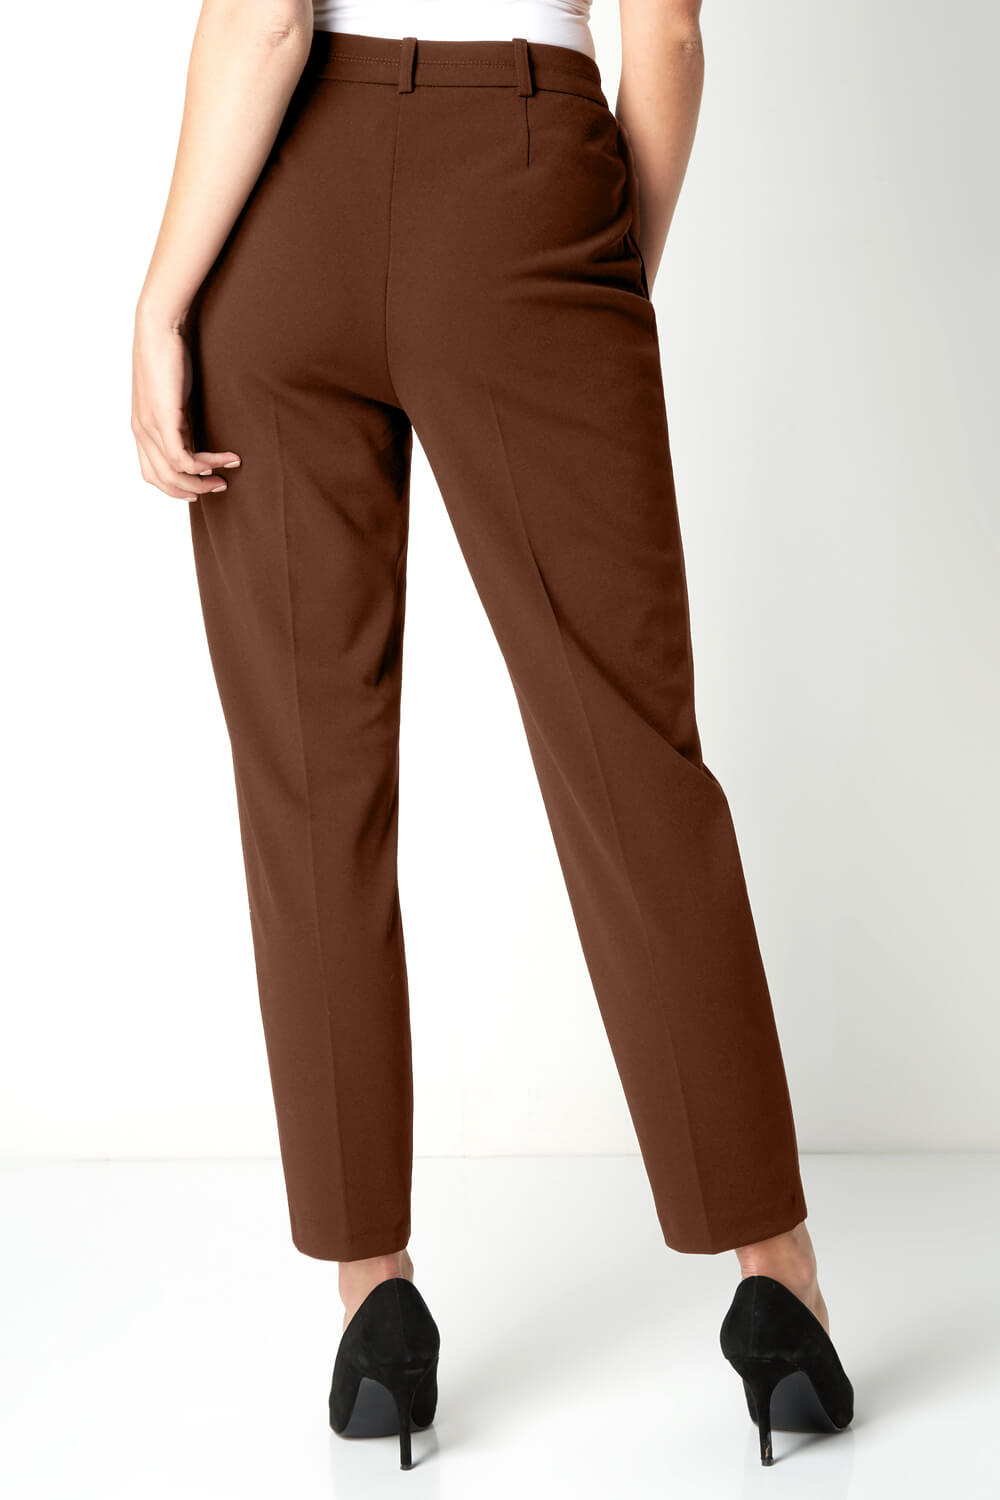 Chocolate Long Straight Leg Stretch Trouser, Image 2 of 3